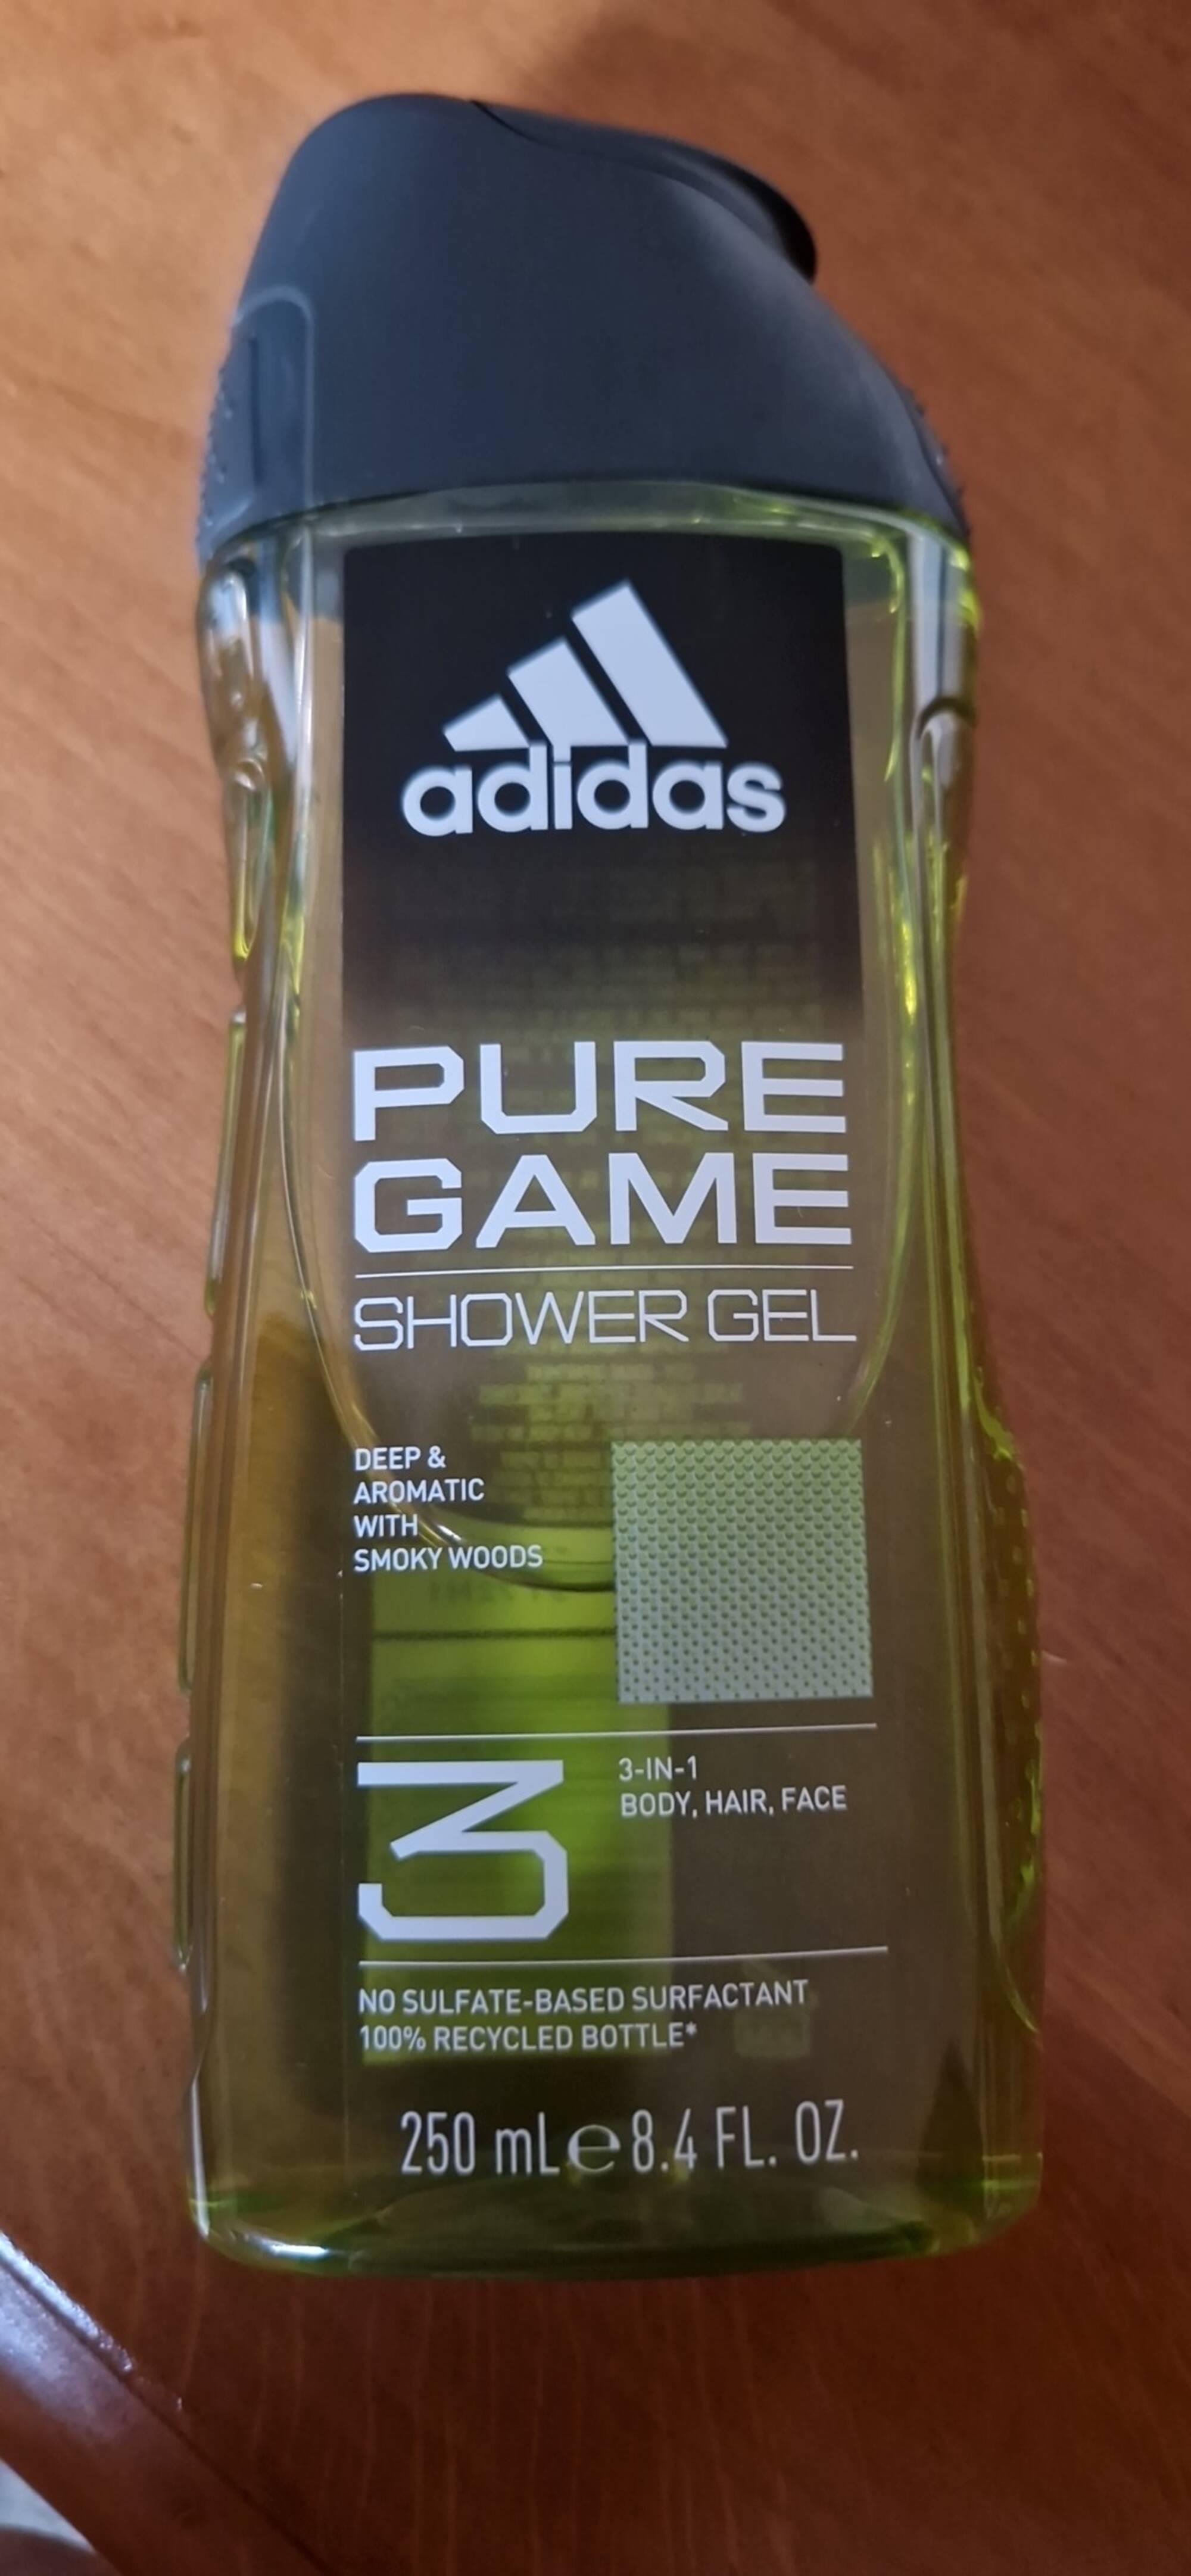 ADIDAS - Pure game - Shower gel 3-in-1